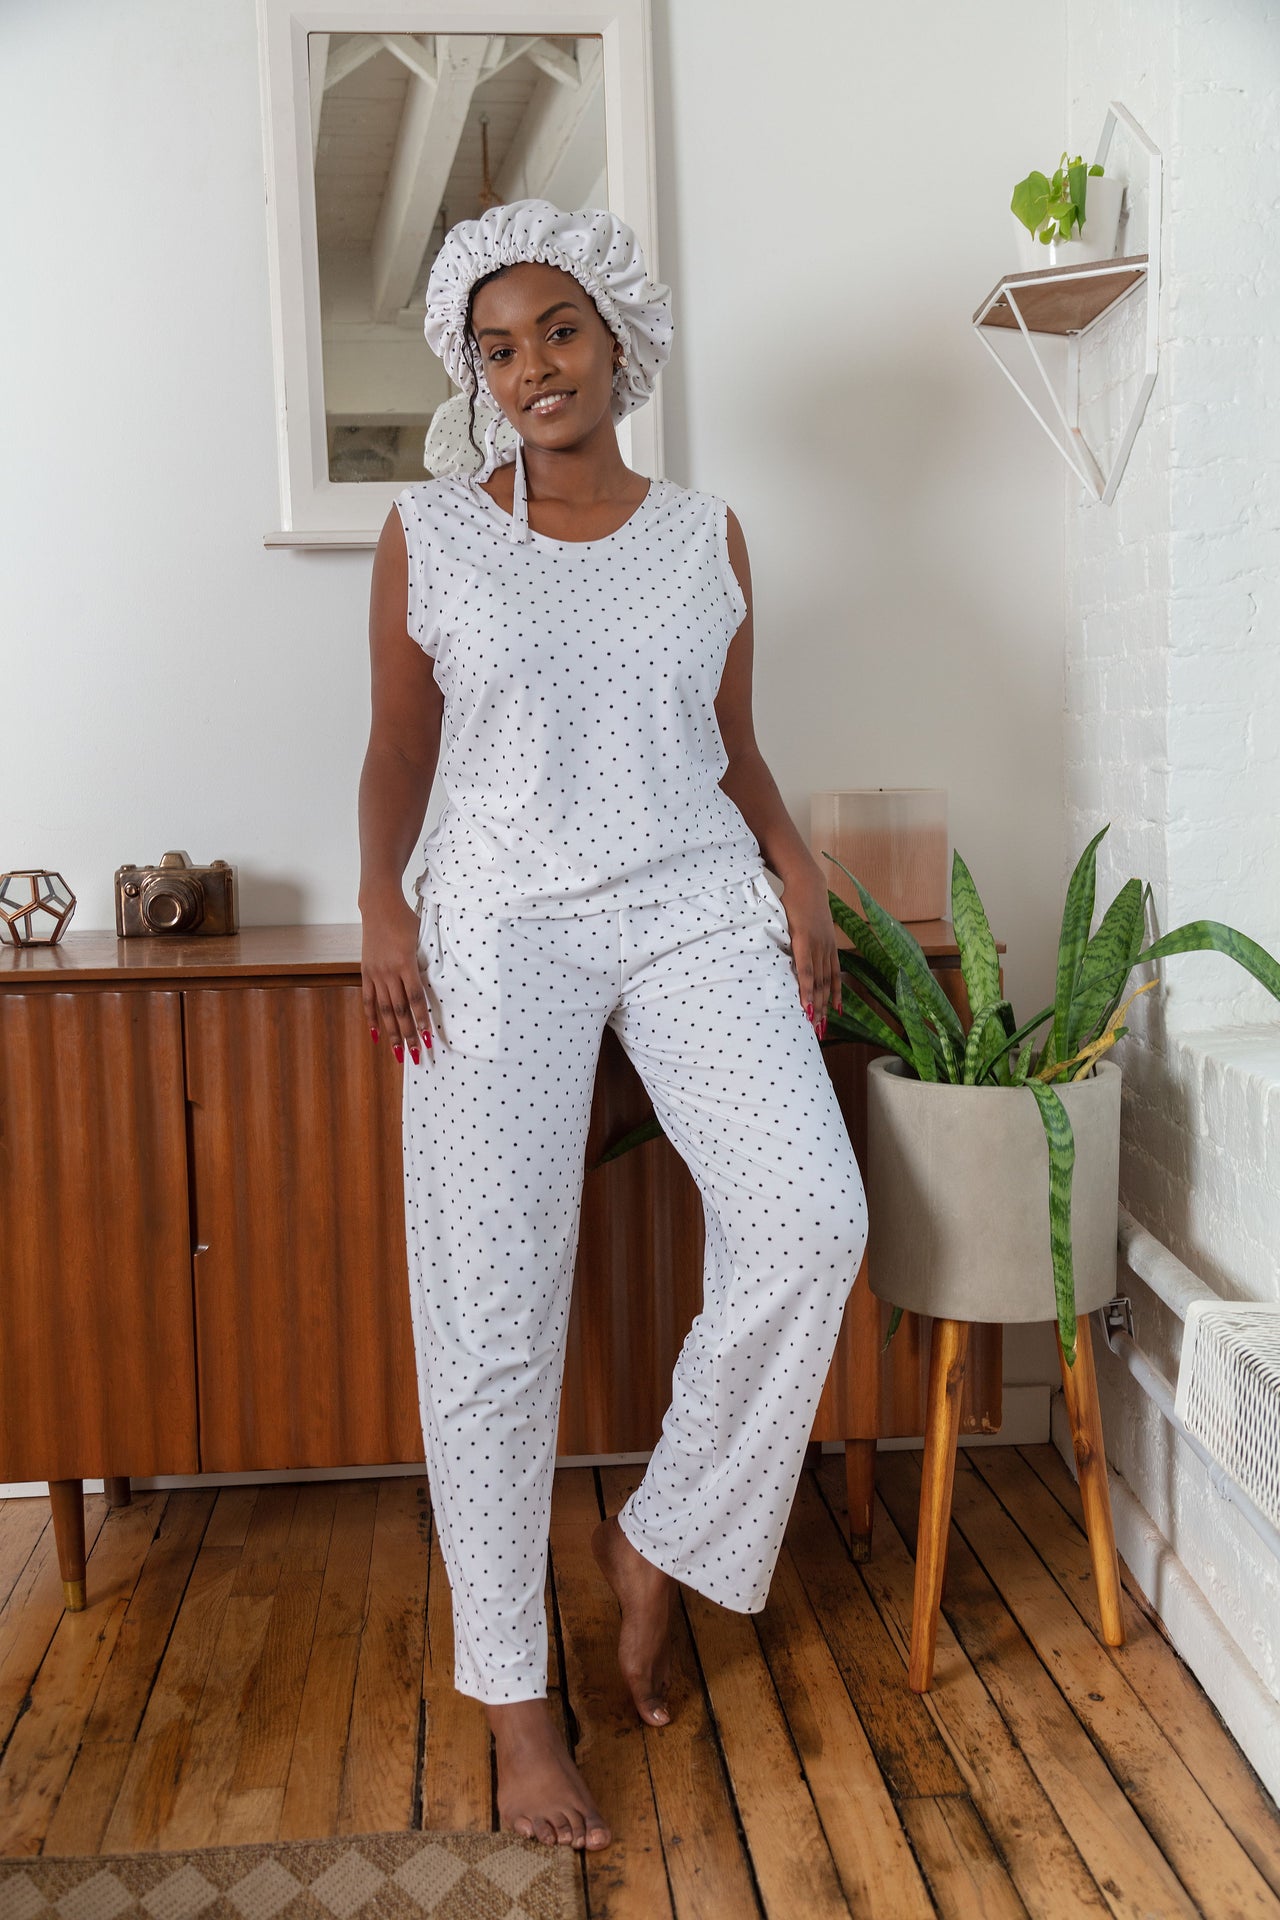 Soft and comfy Bamboo fabric, White and Black Polka Dots women's sleepwear/loungewear. Women's Pajama pants set with a Matching satin-lined bonnet.